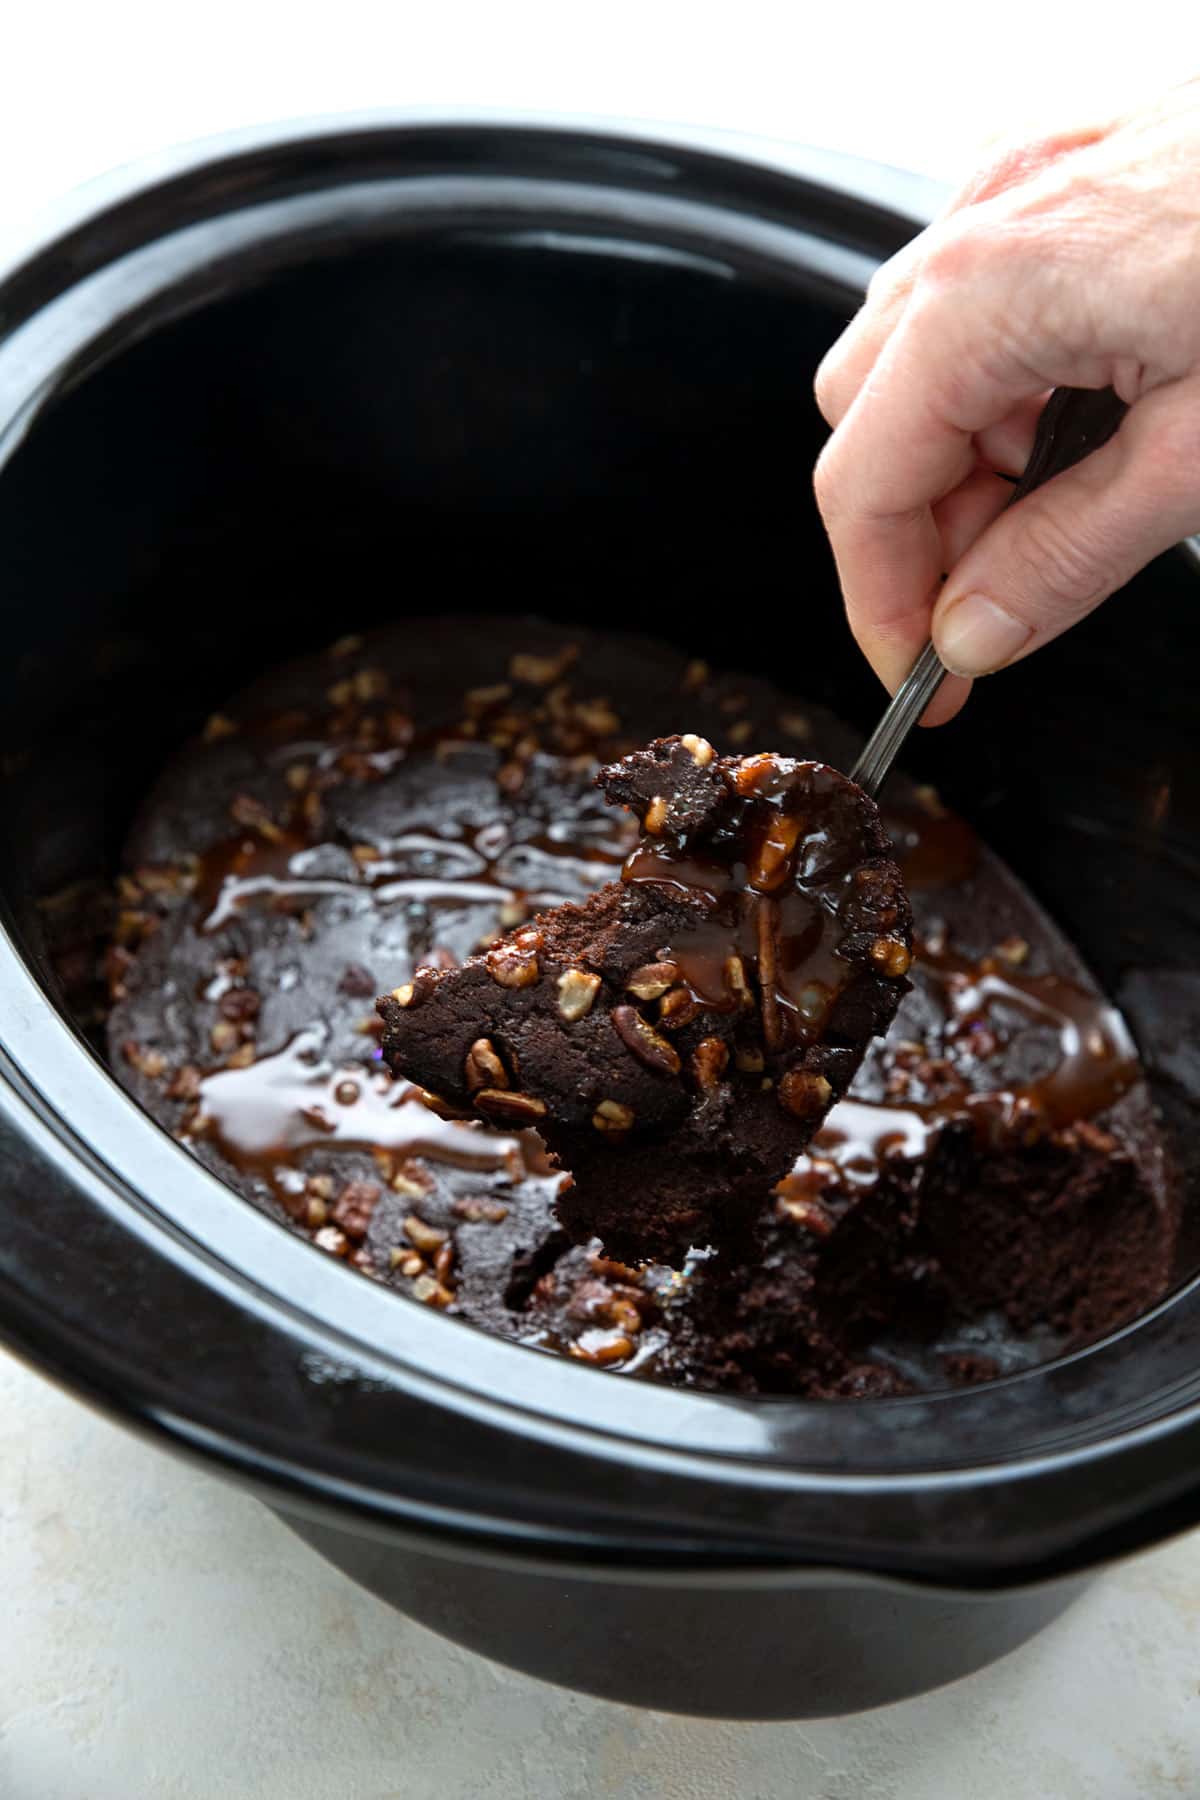 A hand scooping slow cooker brownies out of the slow cooker.